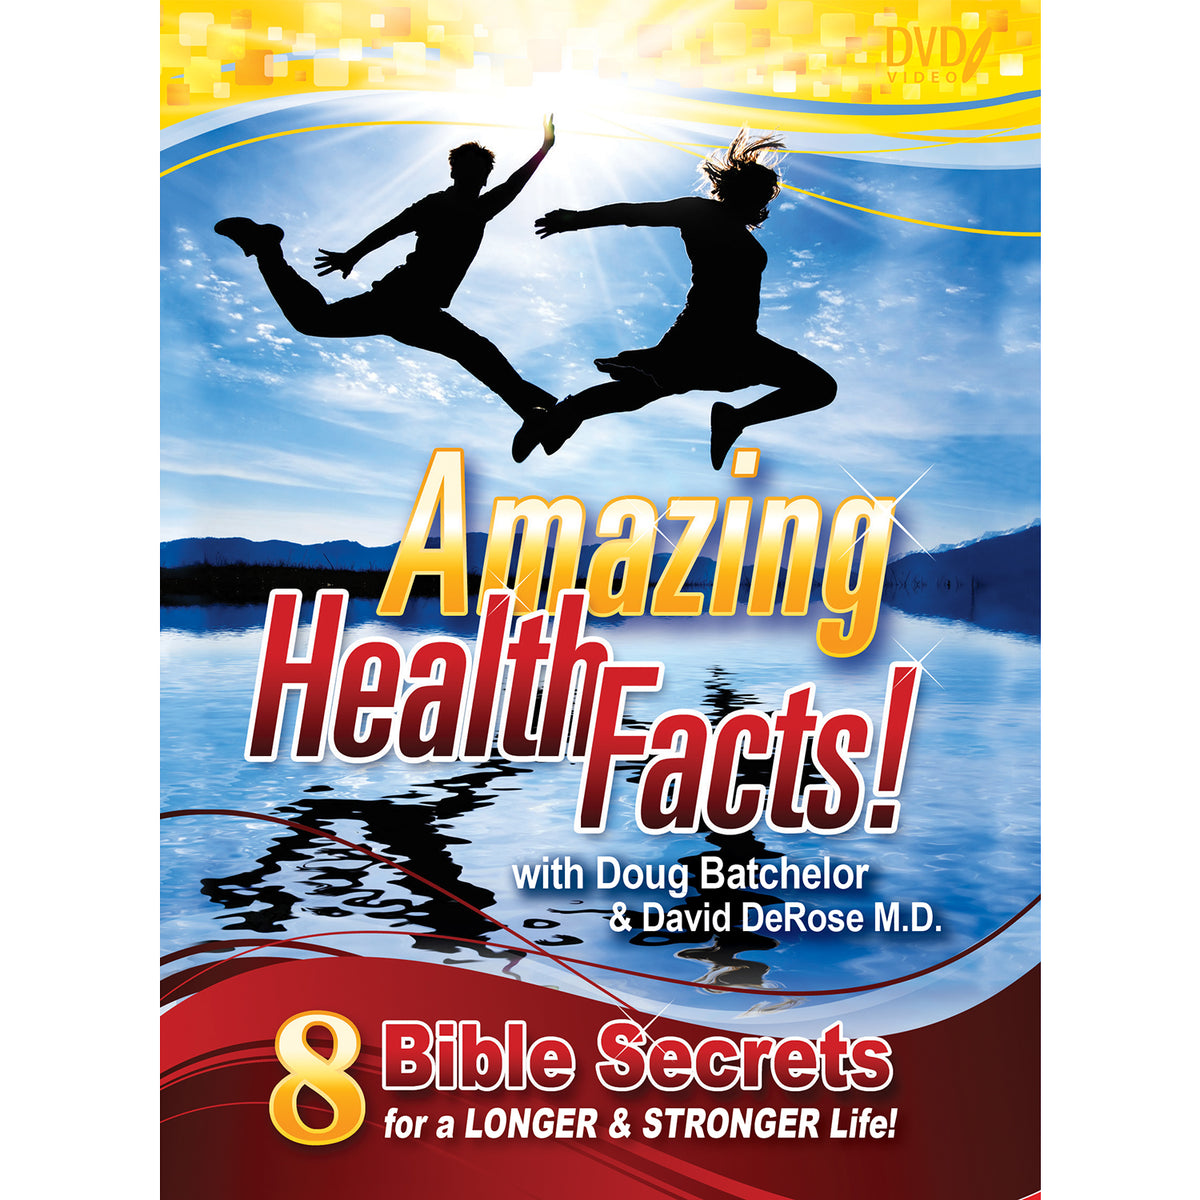 Amazing Health Facts DVD  (Sharing Edition) by Pastor Doug Batchelor